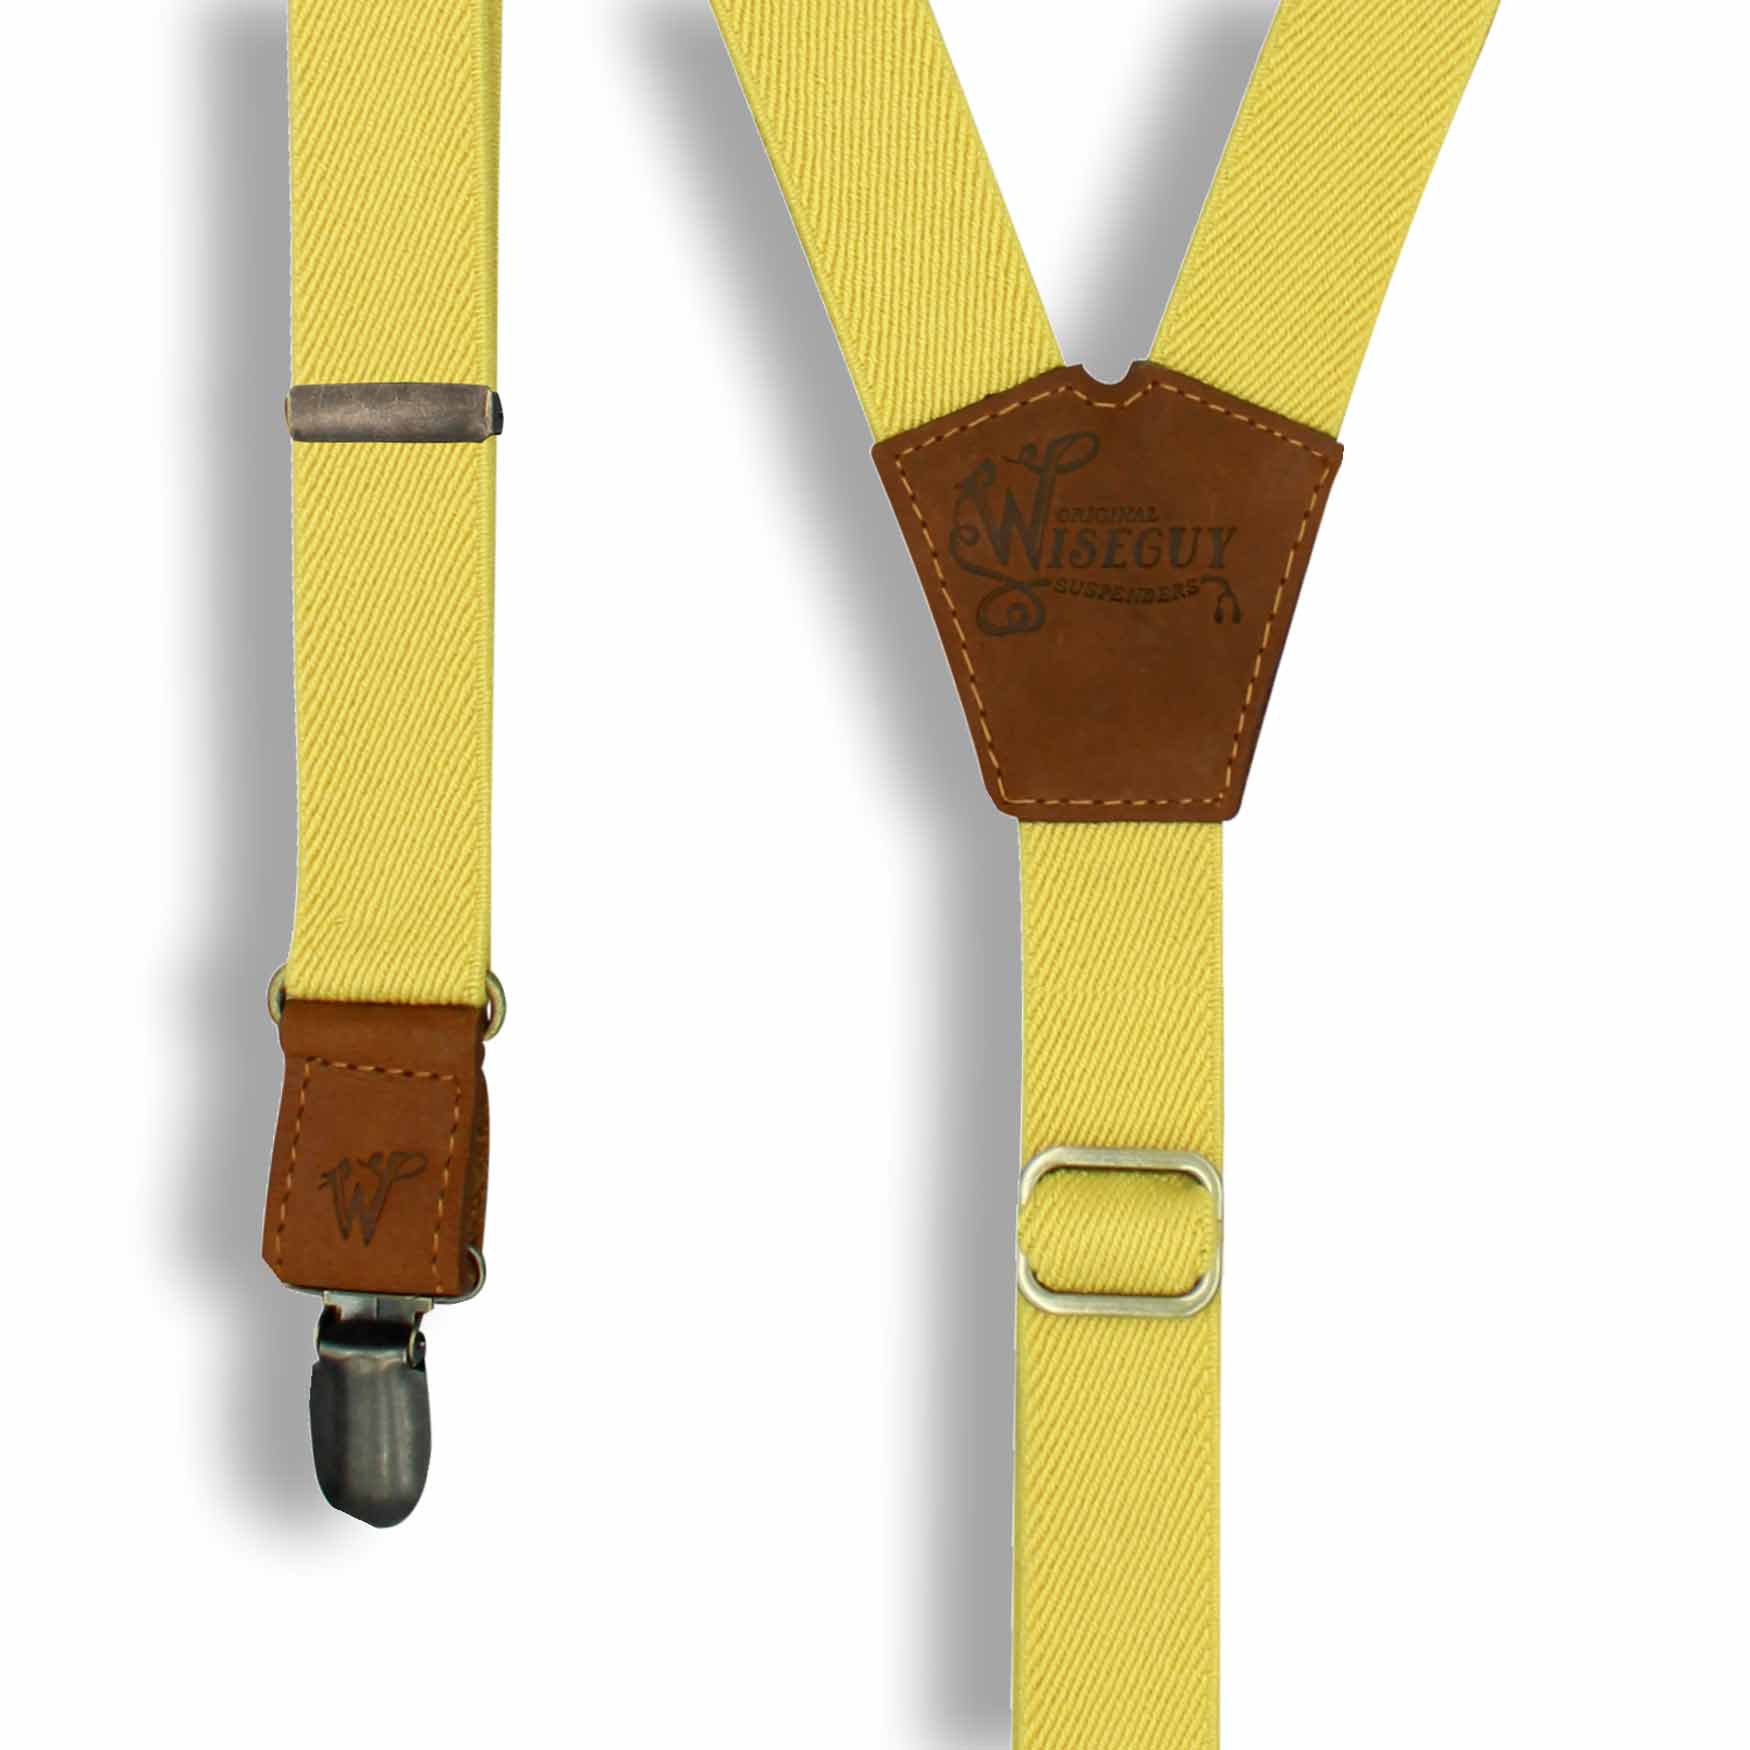 The Tuscany Suspenders on Camel Brown & Brass slim straps (1 inch/ 2.5 cm) - Wiseguy Suspenders